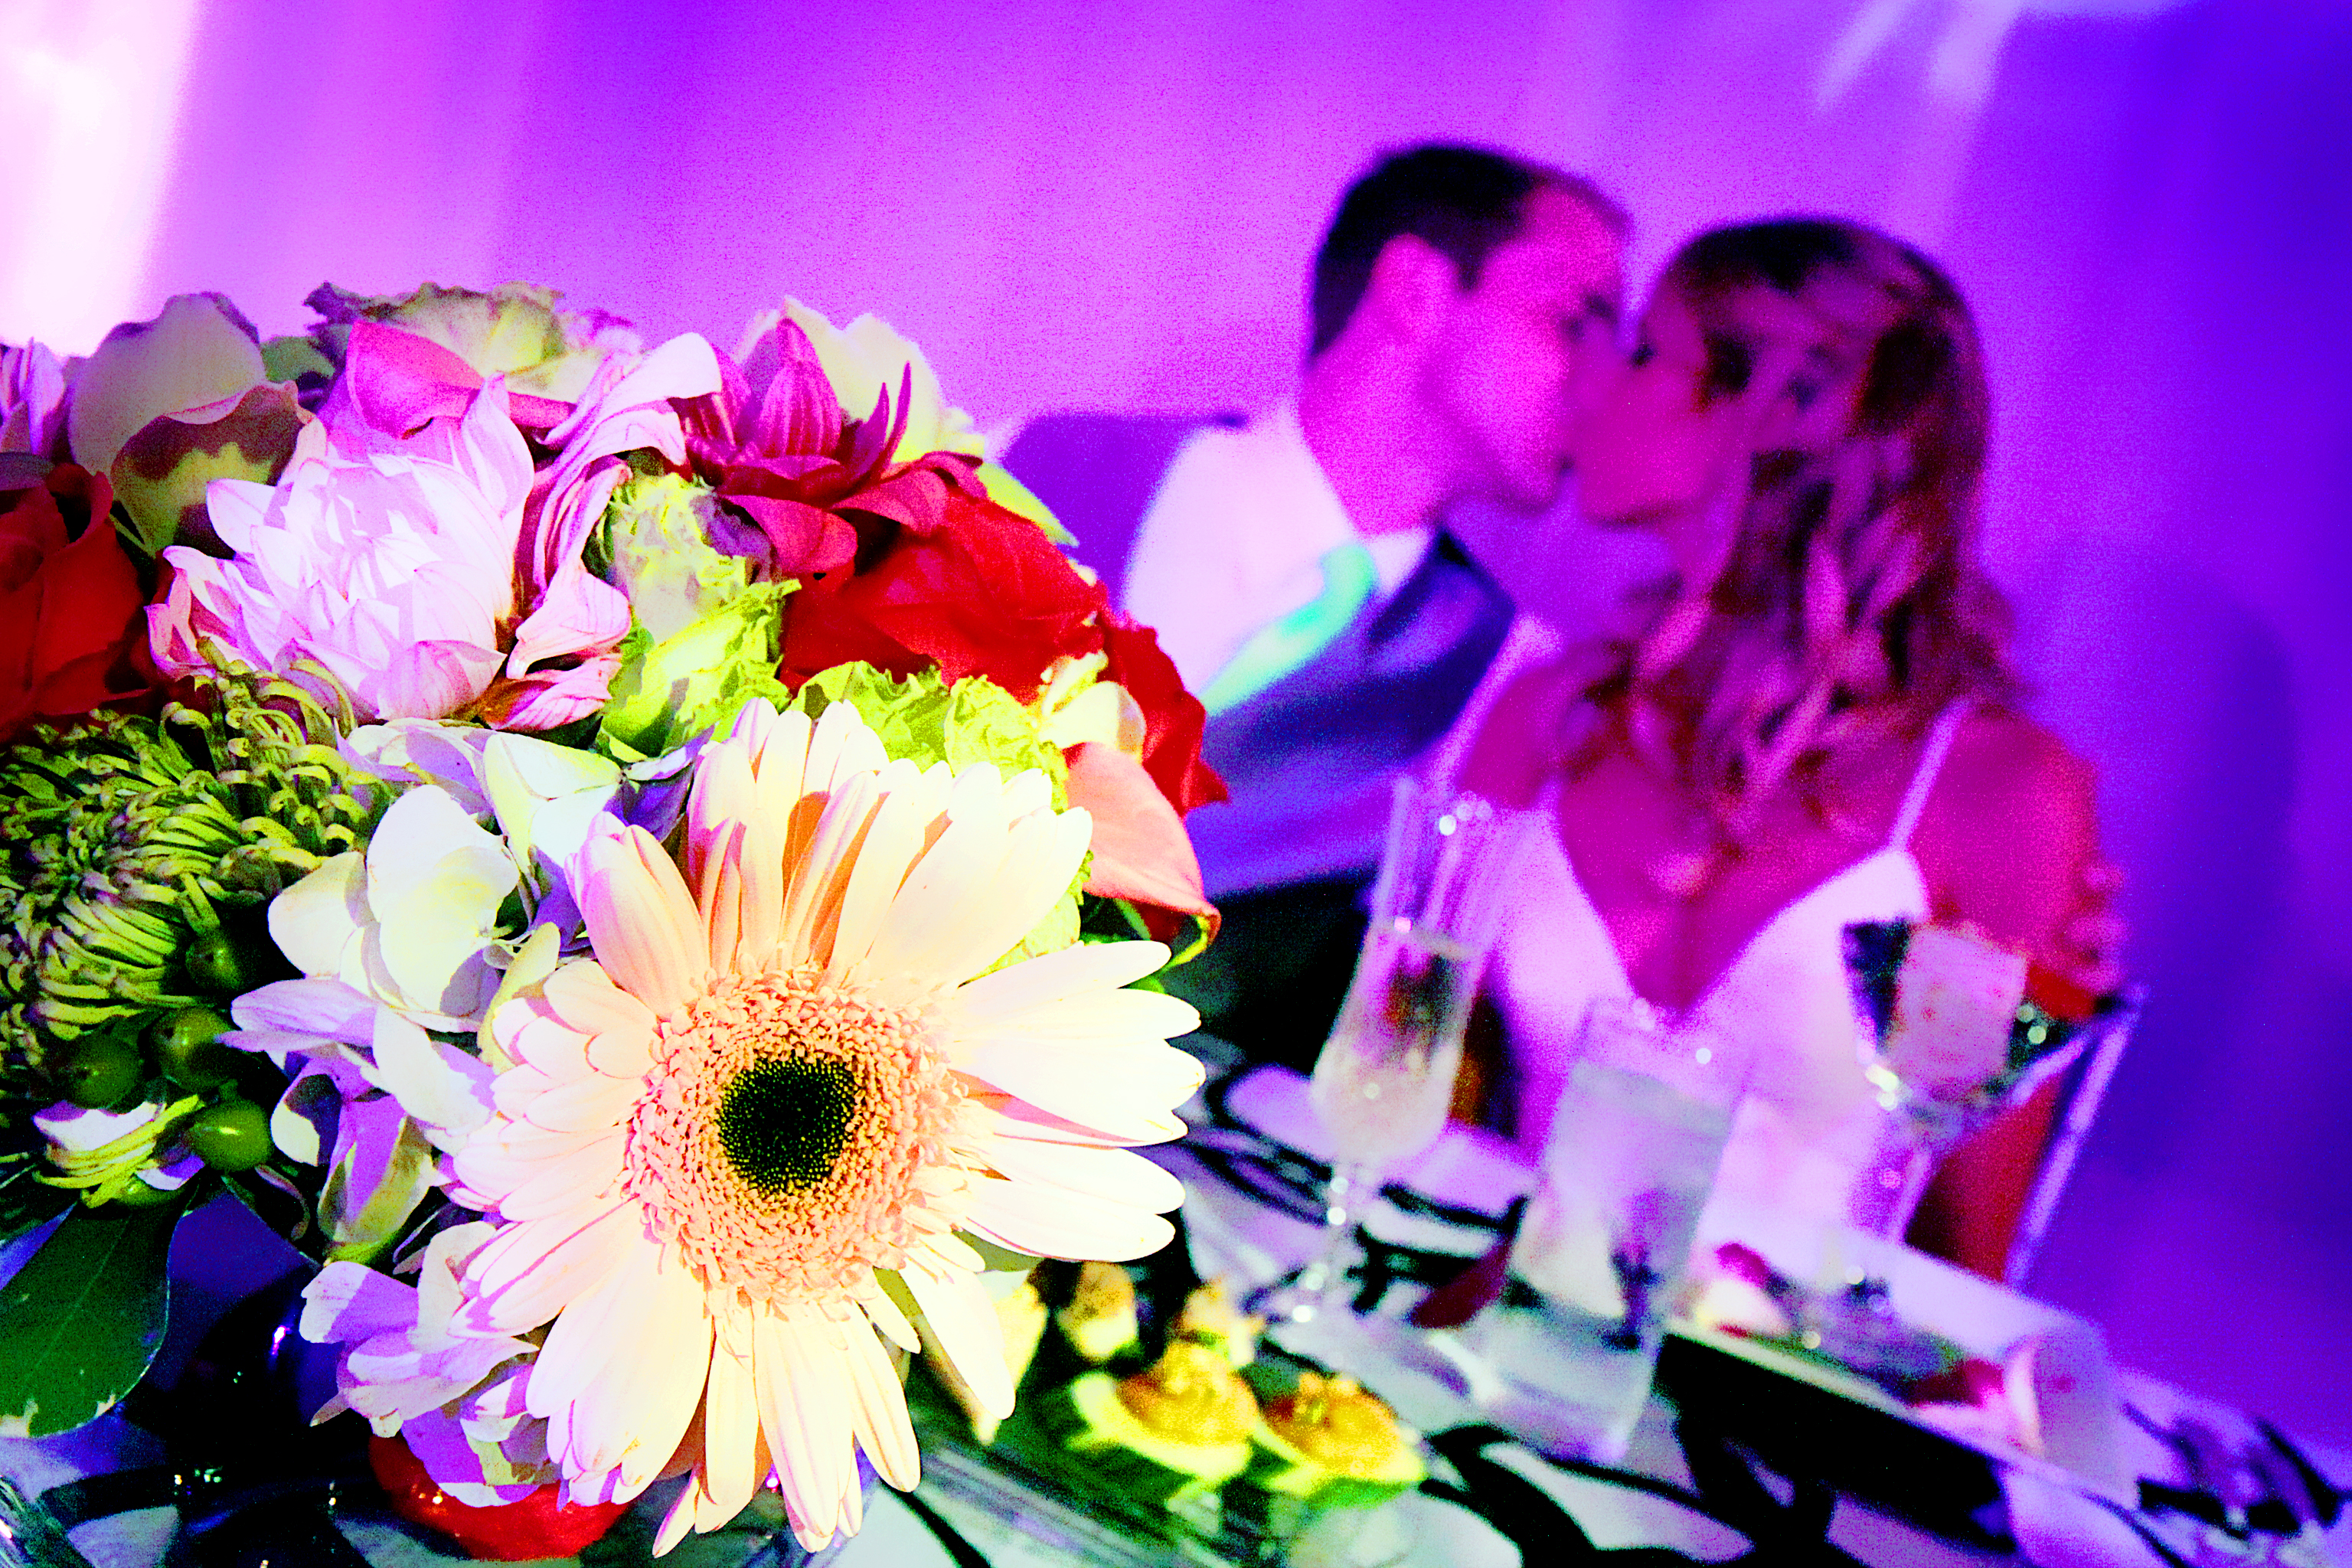 Bride and groom at sweetheart table